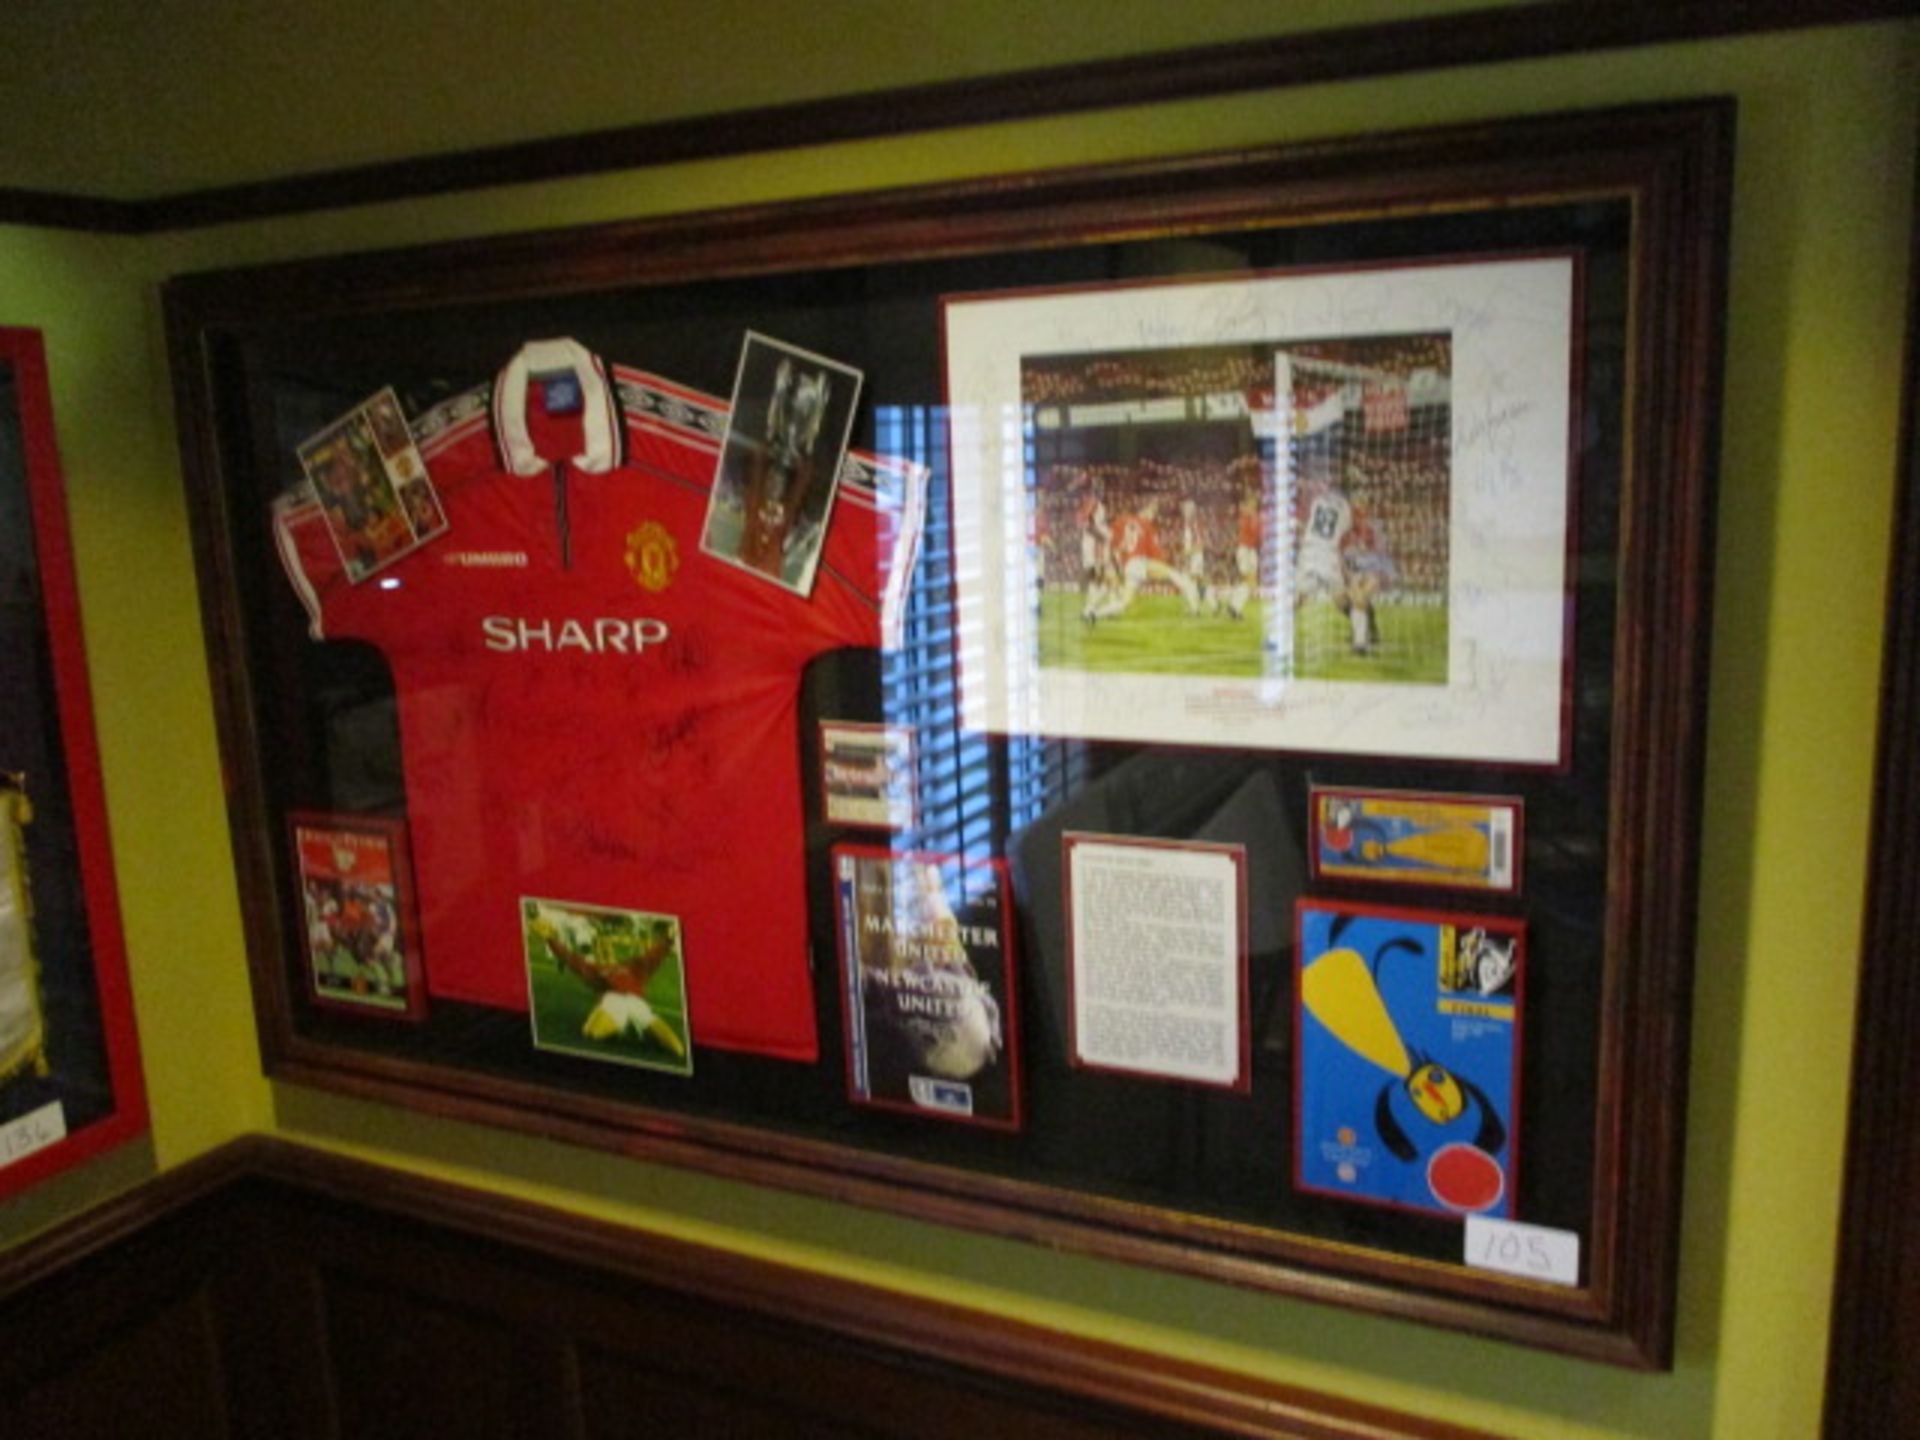 Manchester United treble winners, 1999 shirt and display, 72-1/2in w x 43-1/2in hgt red repilca - Image 3 of 4